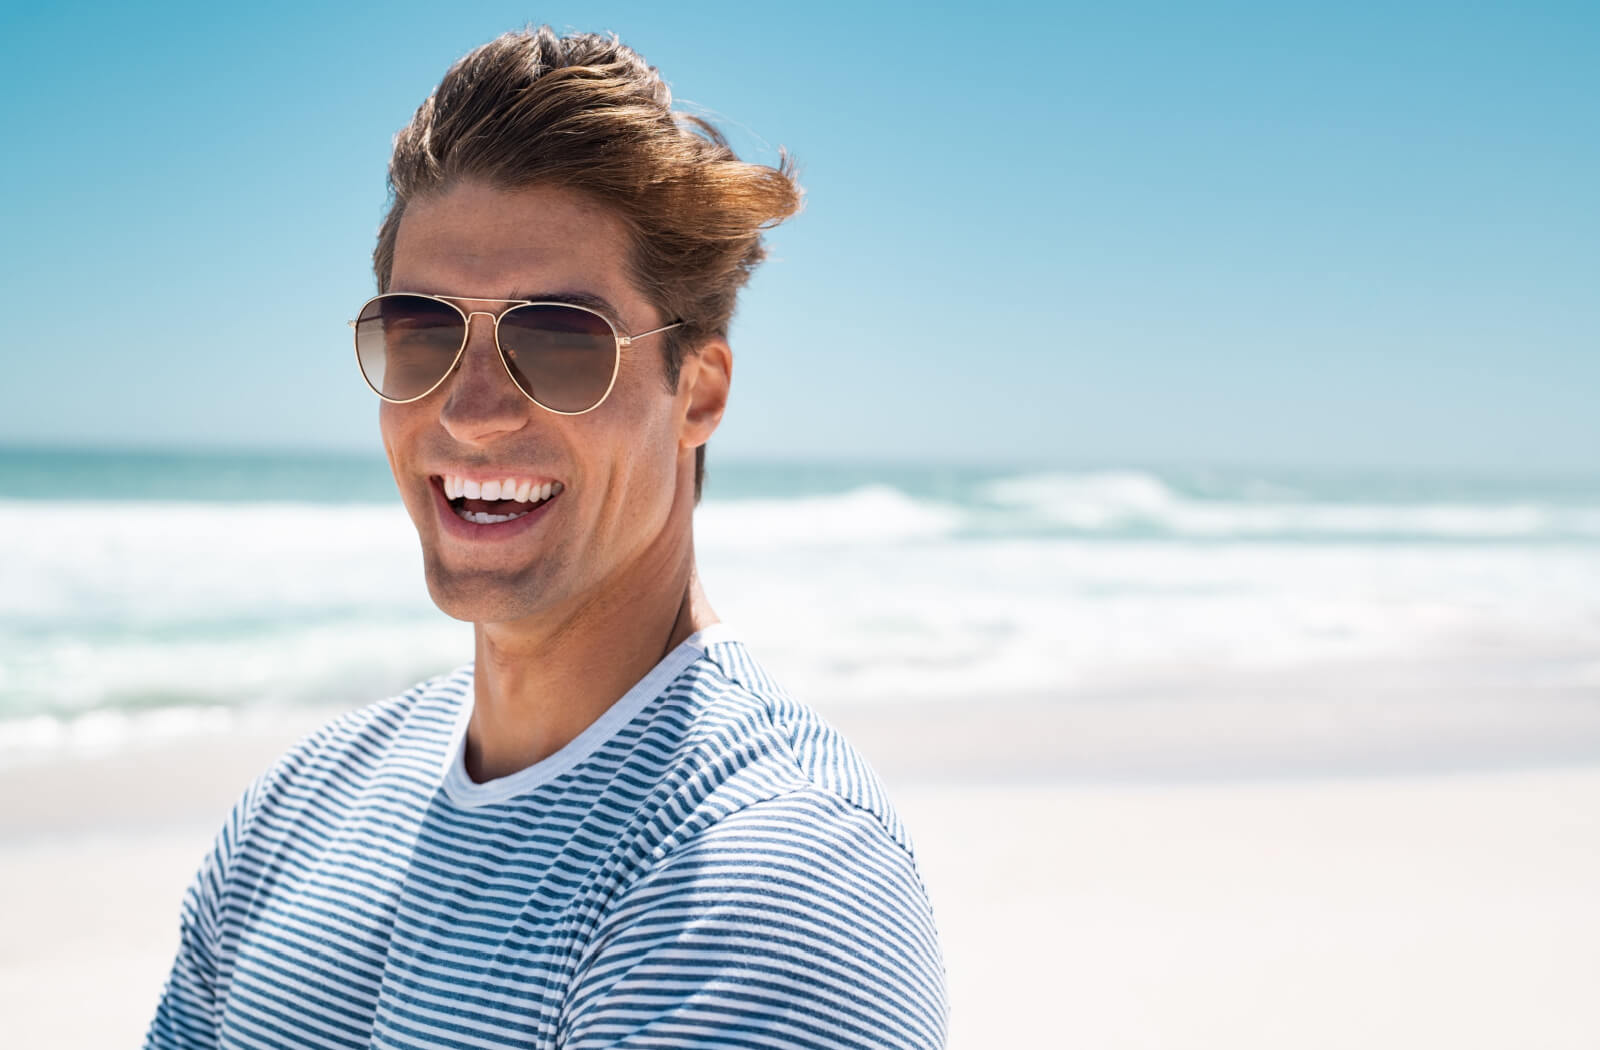 https://prairievision.com/wp-content/uploads/2023/05/A-happy-young-man-wearing-a-pair-of-polarized-sunglasses-at-the-beach-to-protect-his-eyes-from-the-sun.-2.jpg